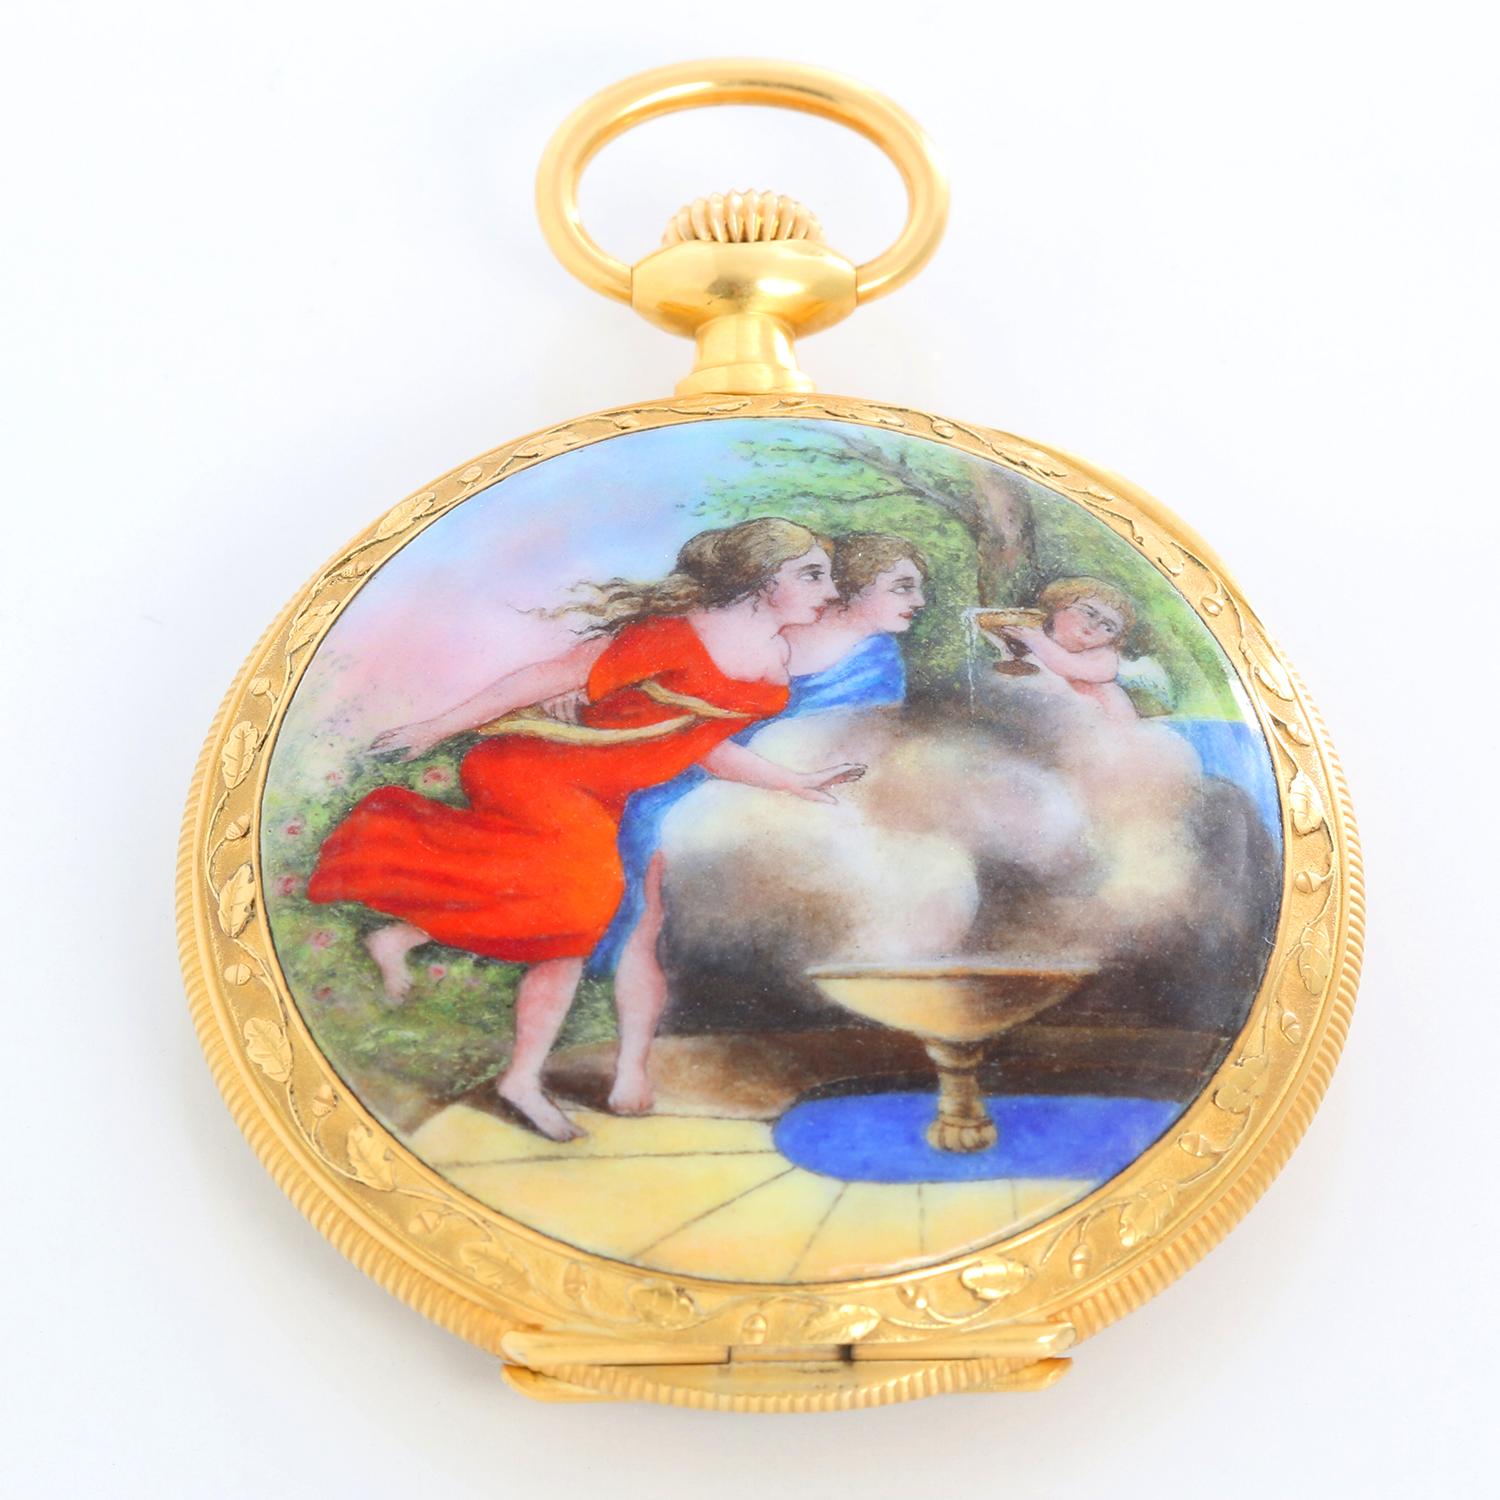 Vacheron Constantin 18K Yellow Gold Enamel Pocket Watch - Manual winding. 18K yellow gold ( 48 mm ). Gold matte/ textured with single sunken subdial with Arabic numerals; Back cover has a wonderful enameled portrait of a cherub with two young women,